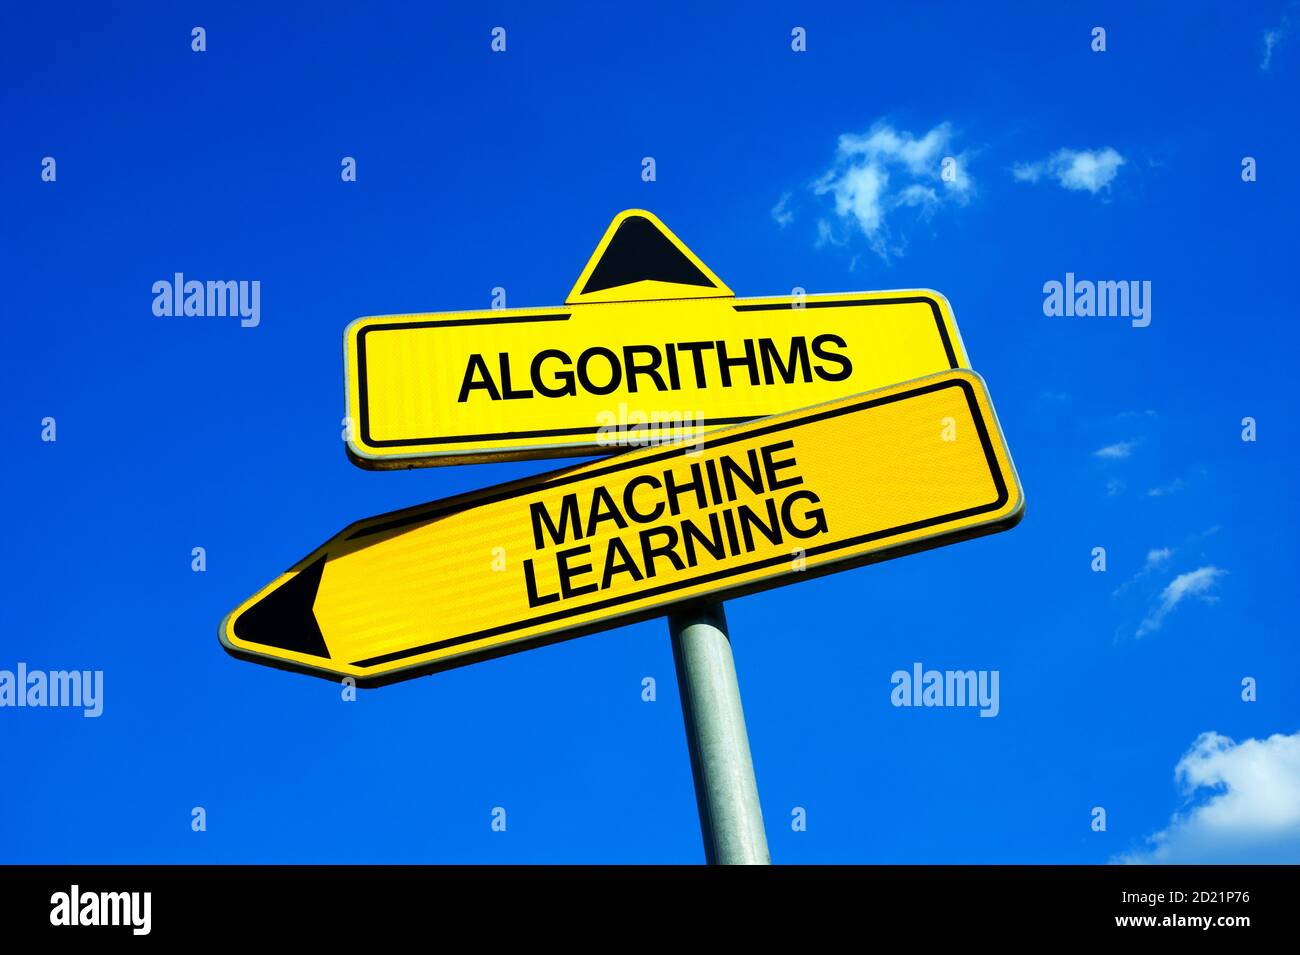 Algorithms vs Machine Learning - Traffic sign with two options - programmed software for robots and machines vs artificial intelligence and autonomy o Stock Photo